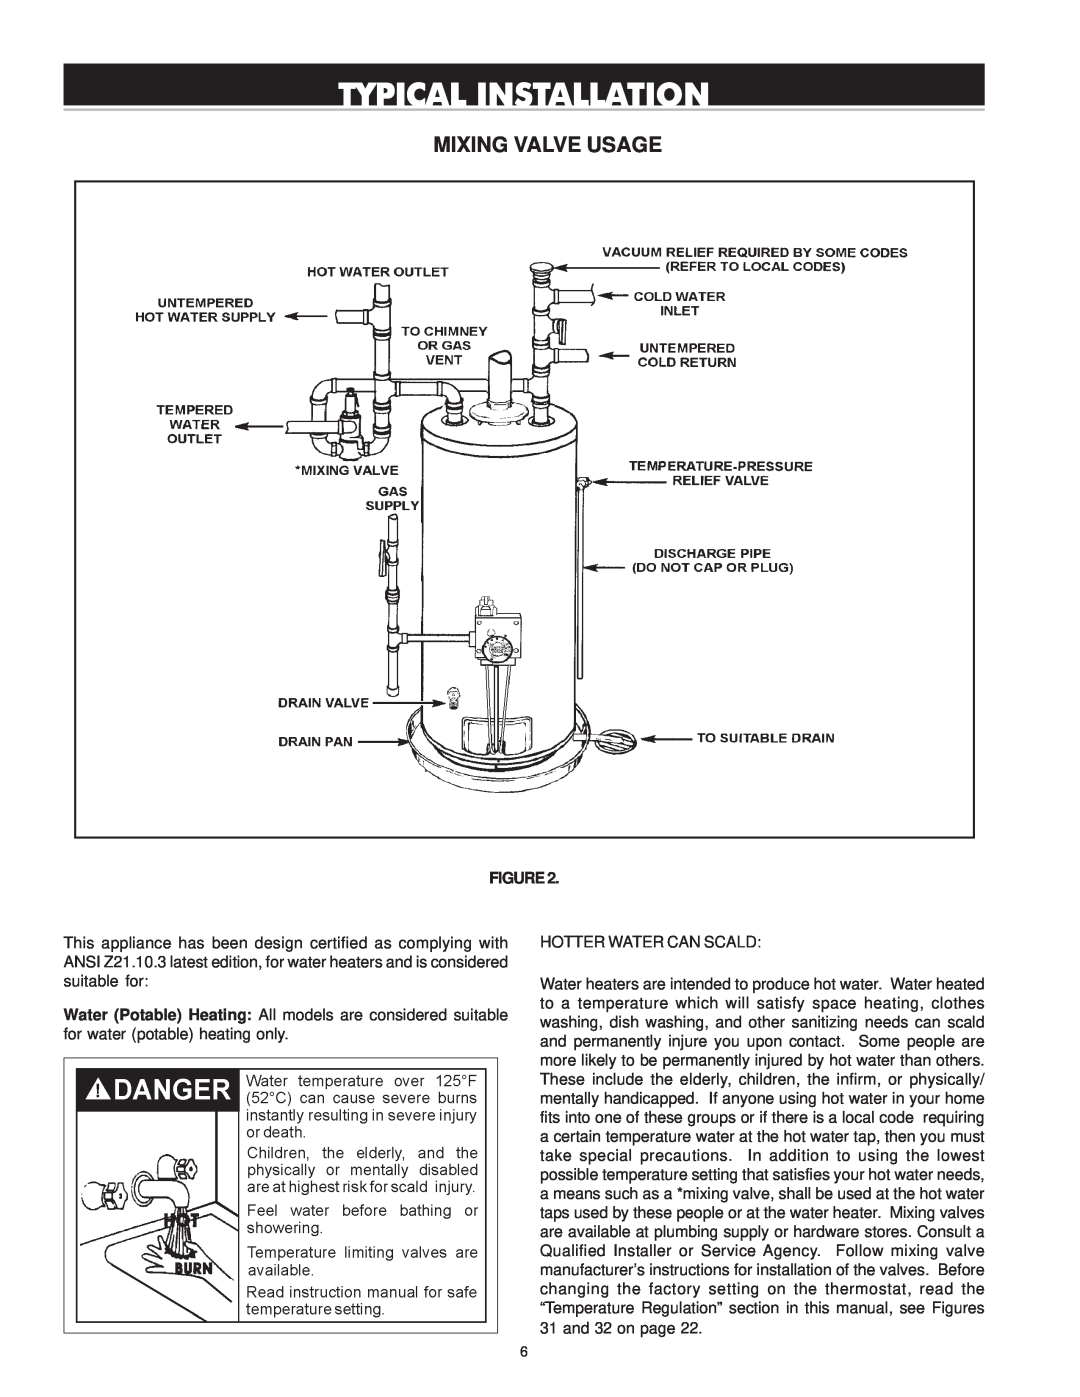 Reliance Water Heaters 196296-001, 606 Series instruction manual Mixing Valve Usage, Typical Installation 